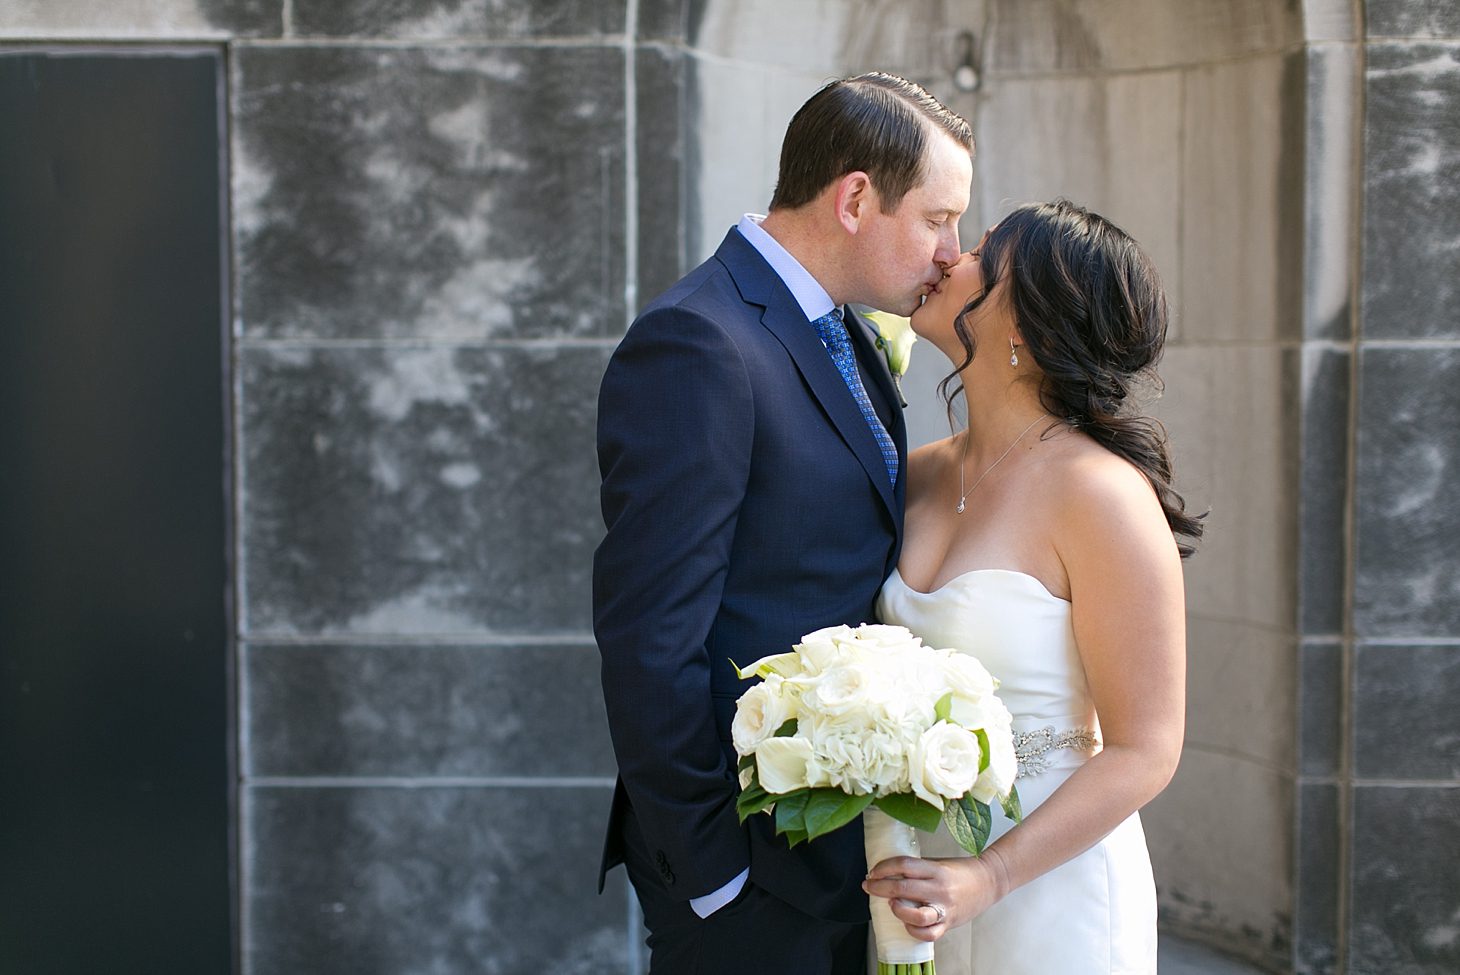 Art Institute of Chicago Wedding by Christy Tyler Photography_0017